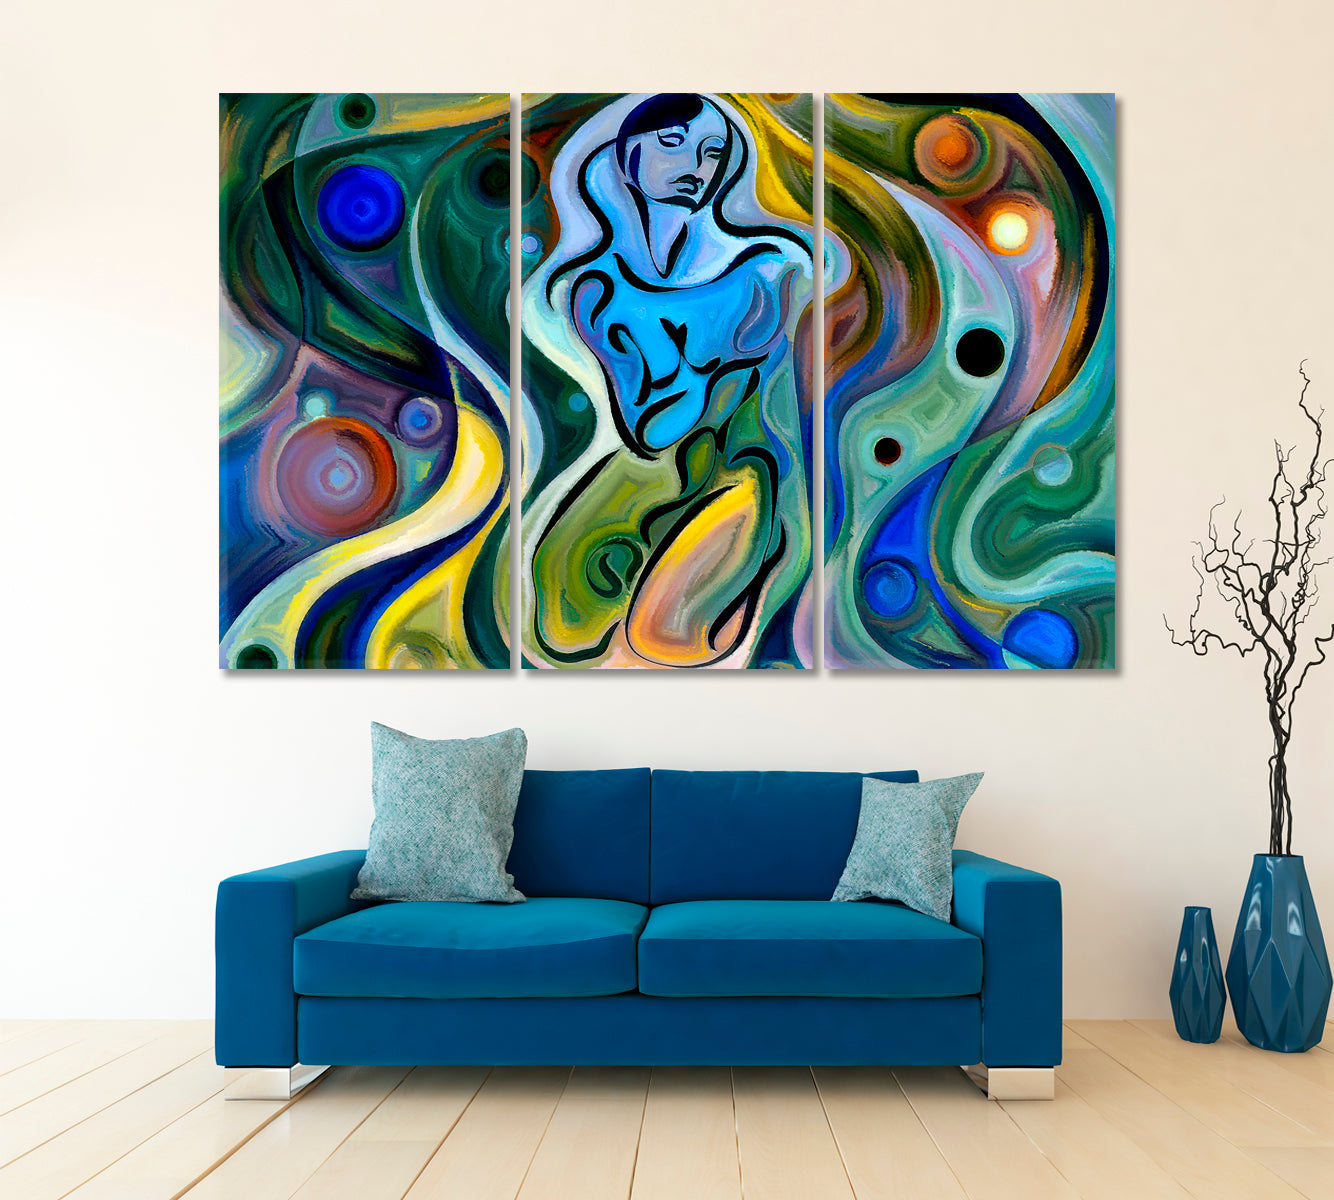 Soul And Being Curves in Colors Beautiful Abstraction Contemporary Art Artesty 3 panels 36" x 24" 